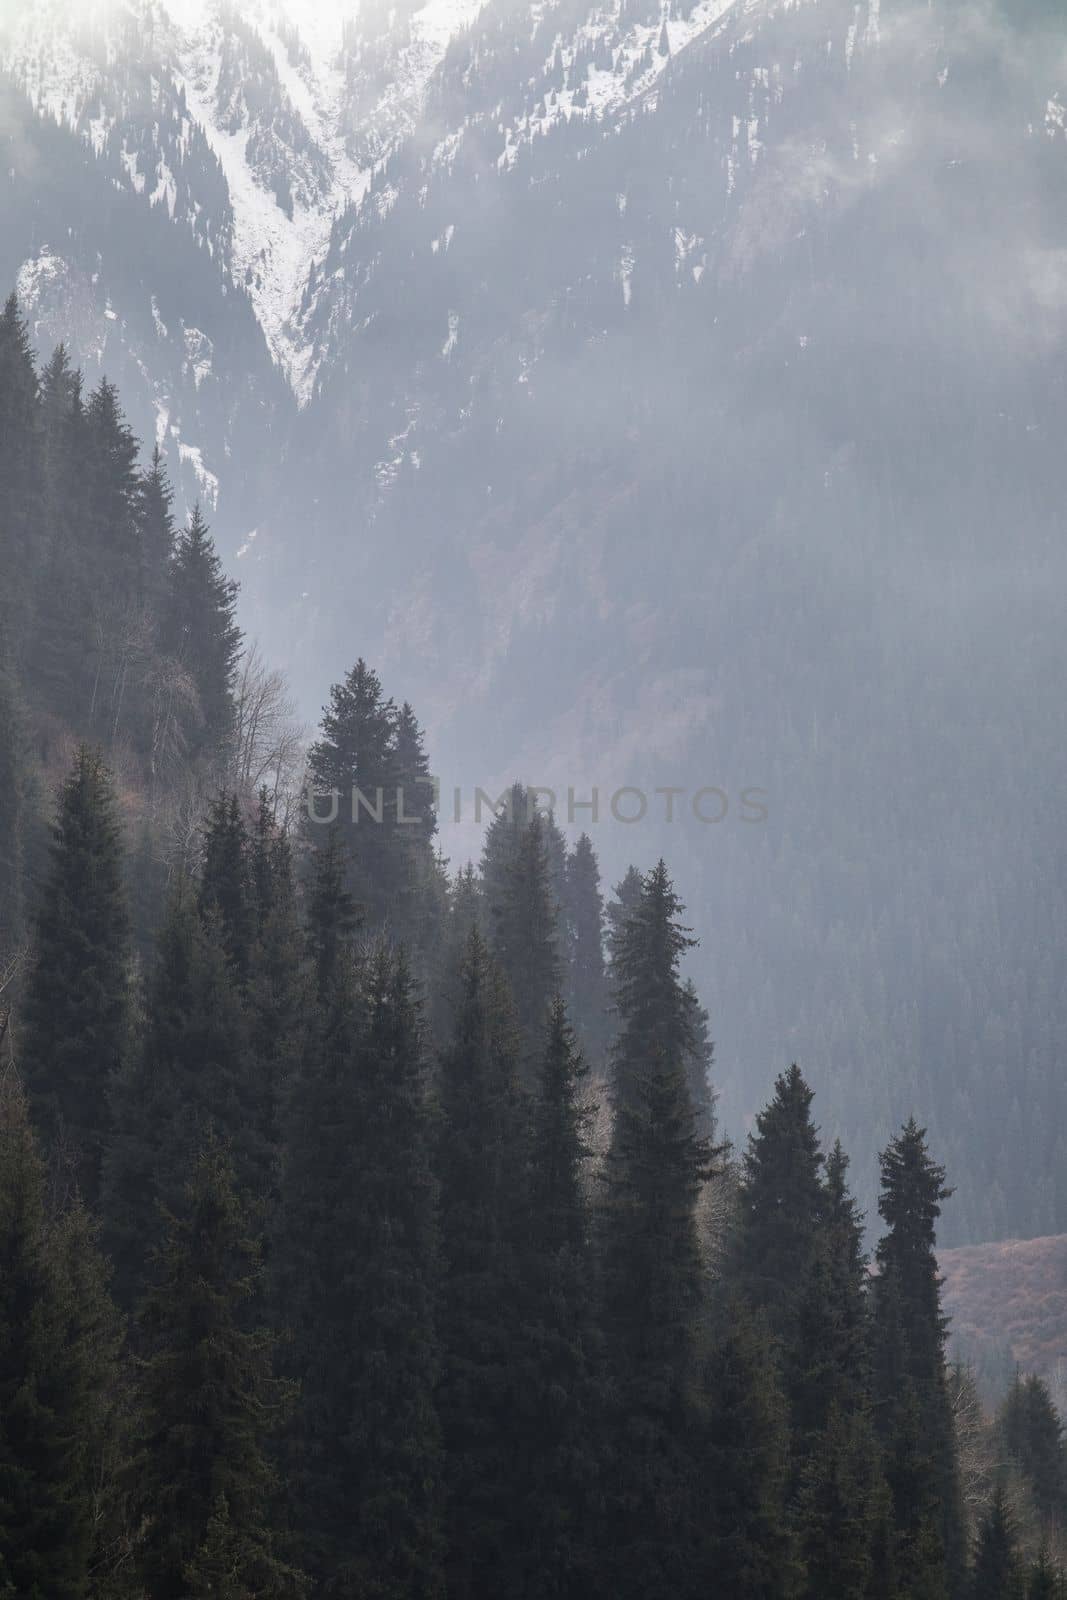 Hazy mountain vertical background with spruce forest.